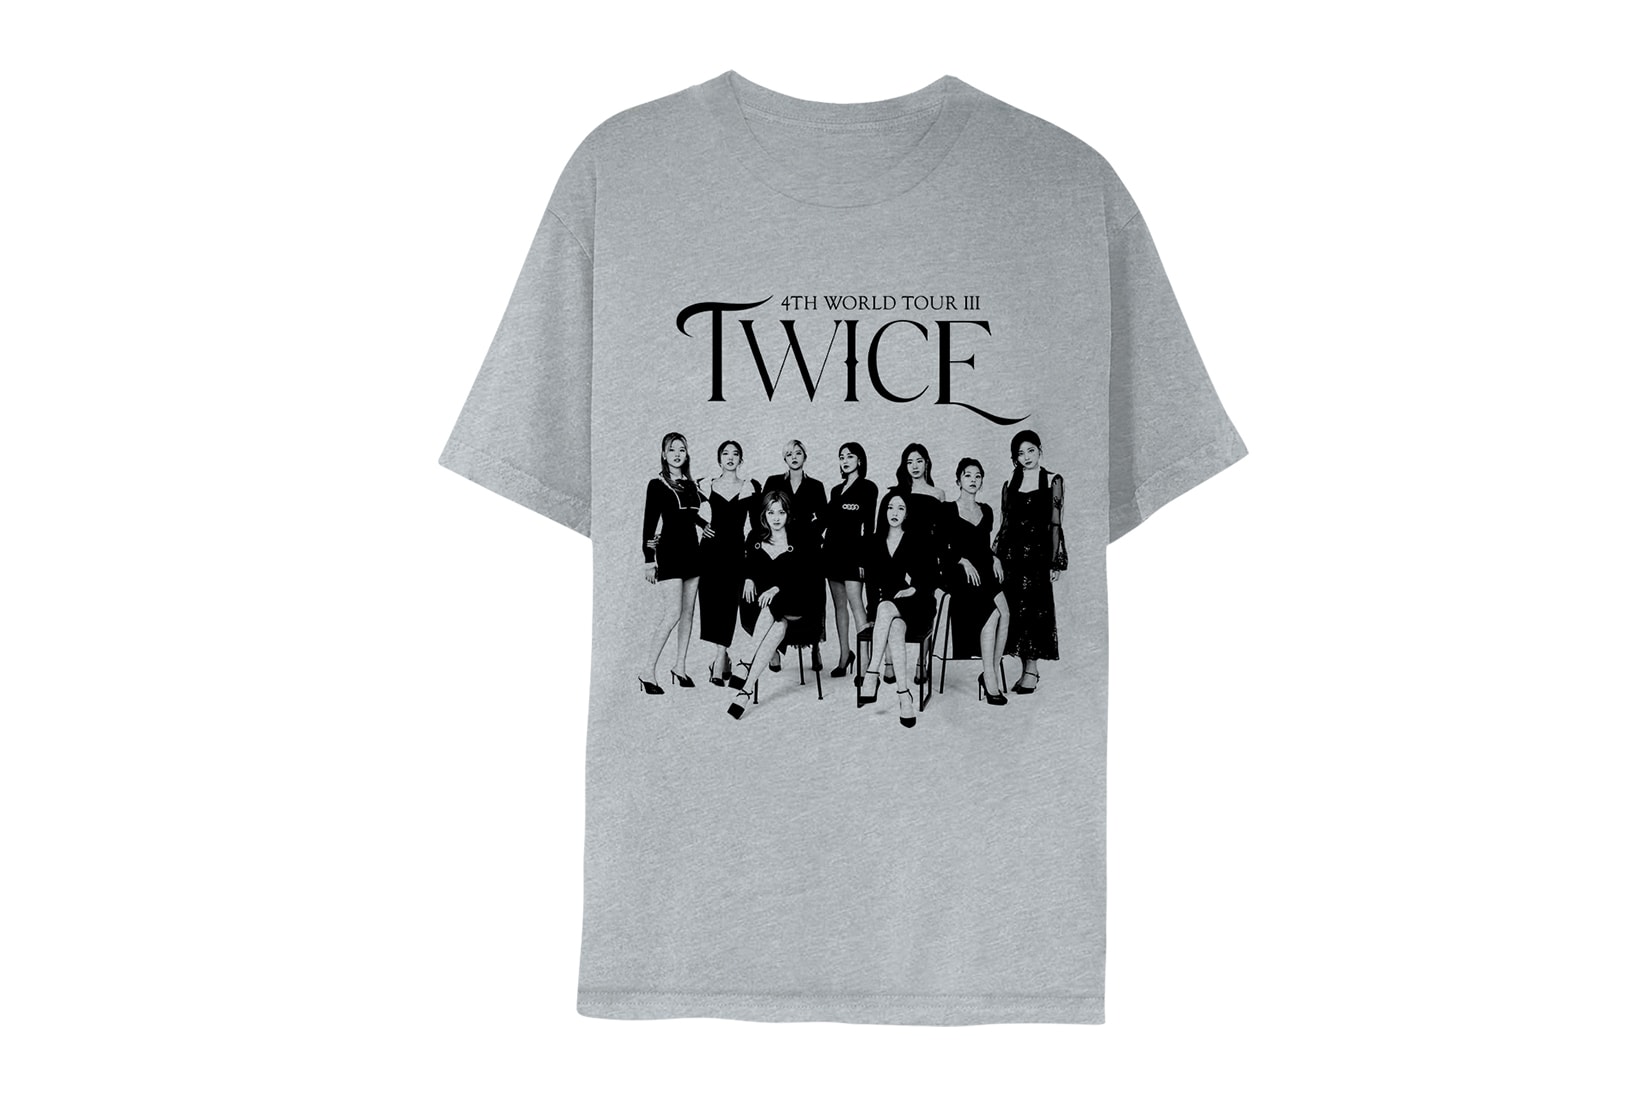 TWICE 4th World Tour Collection Merchandise Outerwear Accessories K-pop T-Shirt Gray